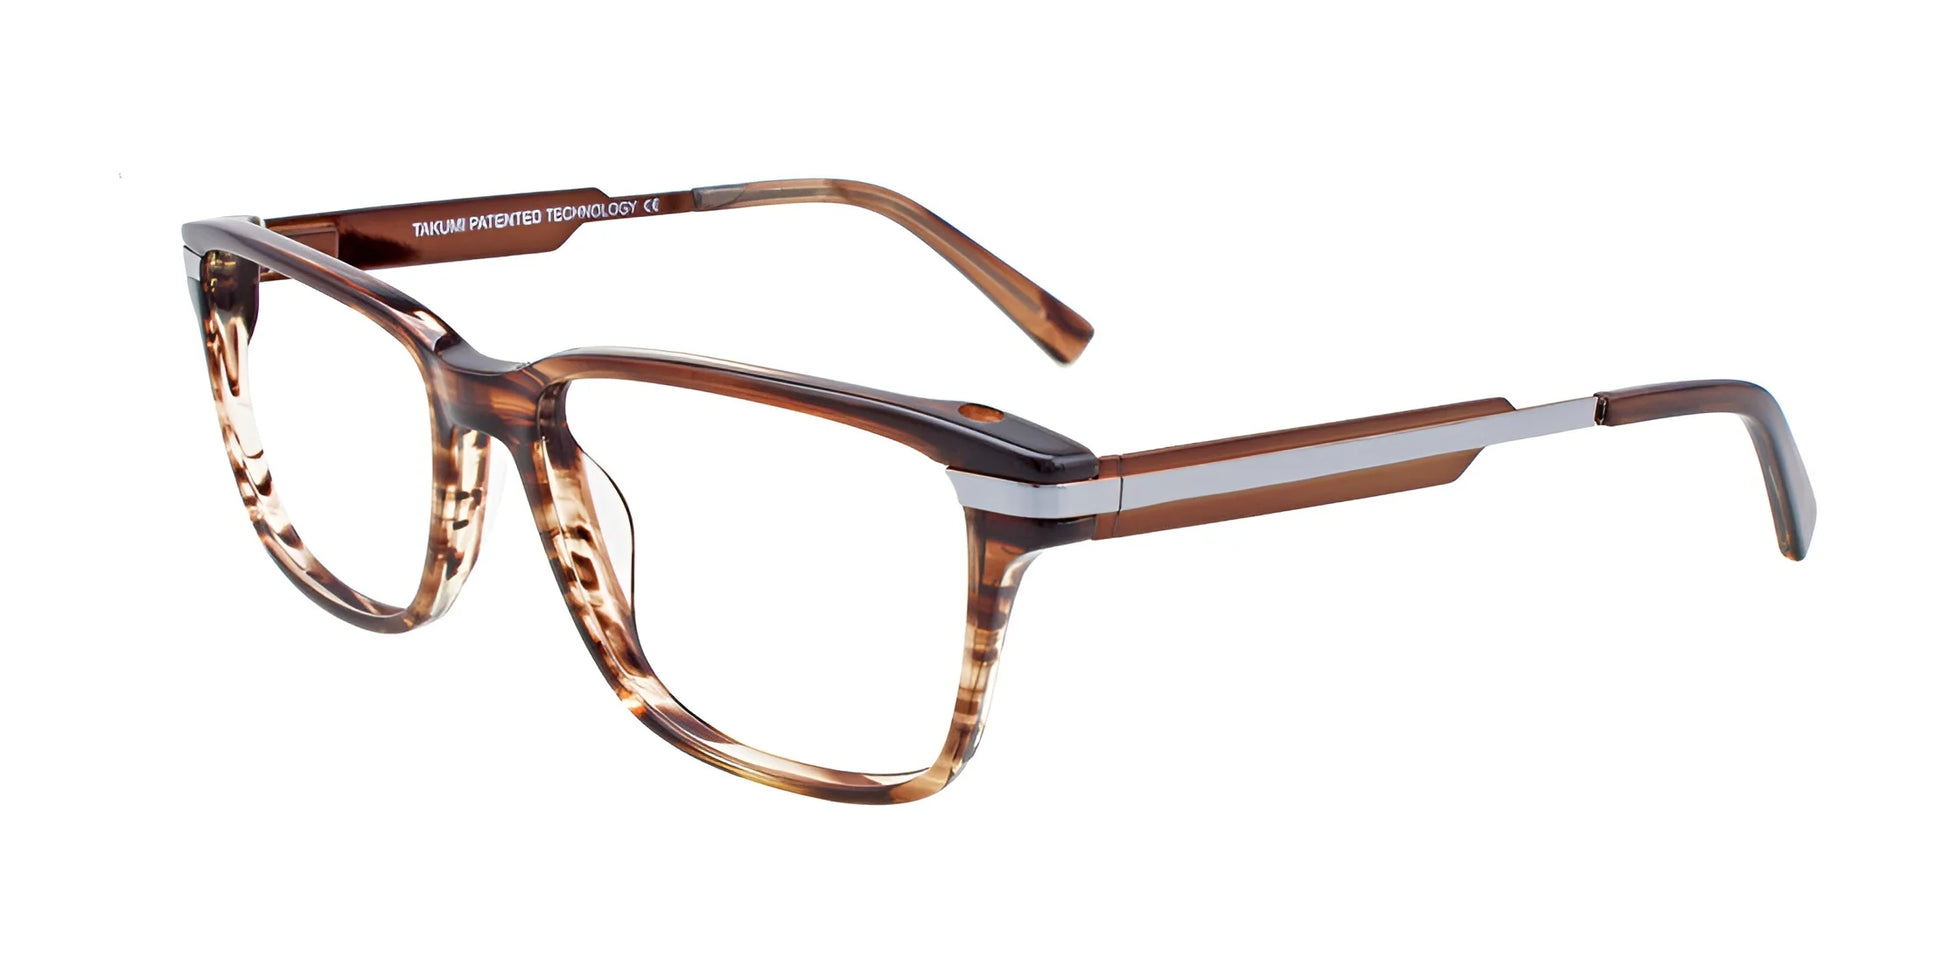 Takumi TK1031 Eyeglasses with Clip-on Sunglasses Brown Marbled